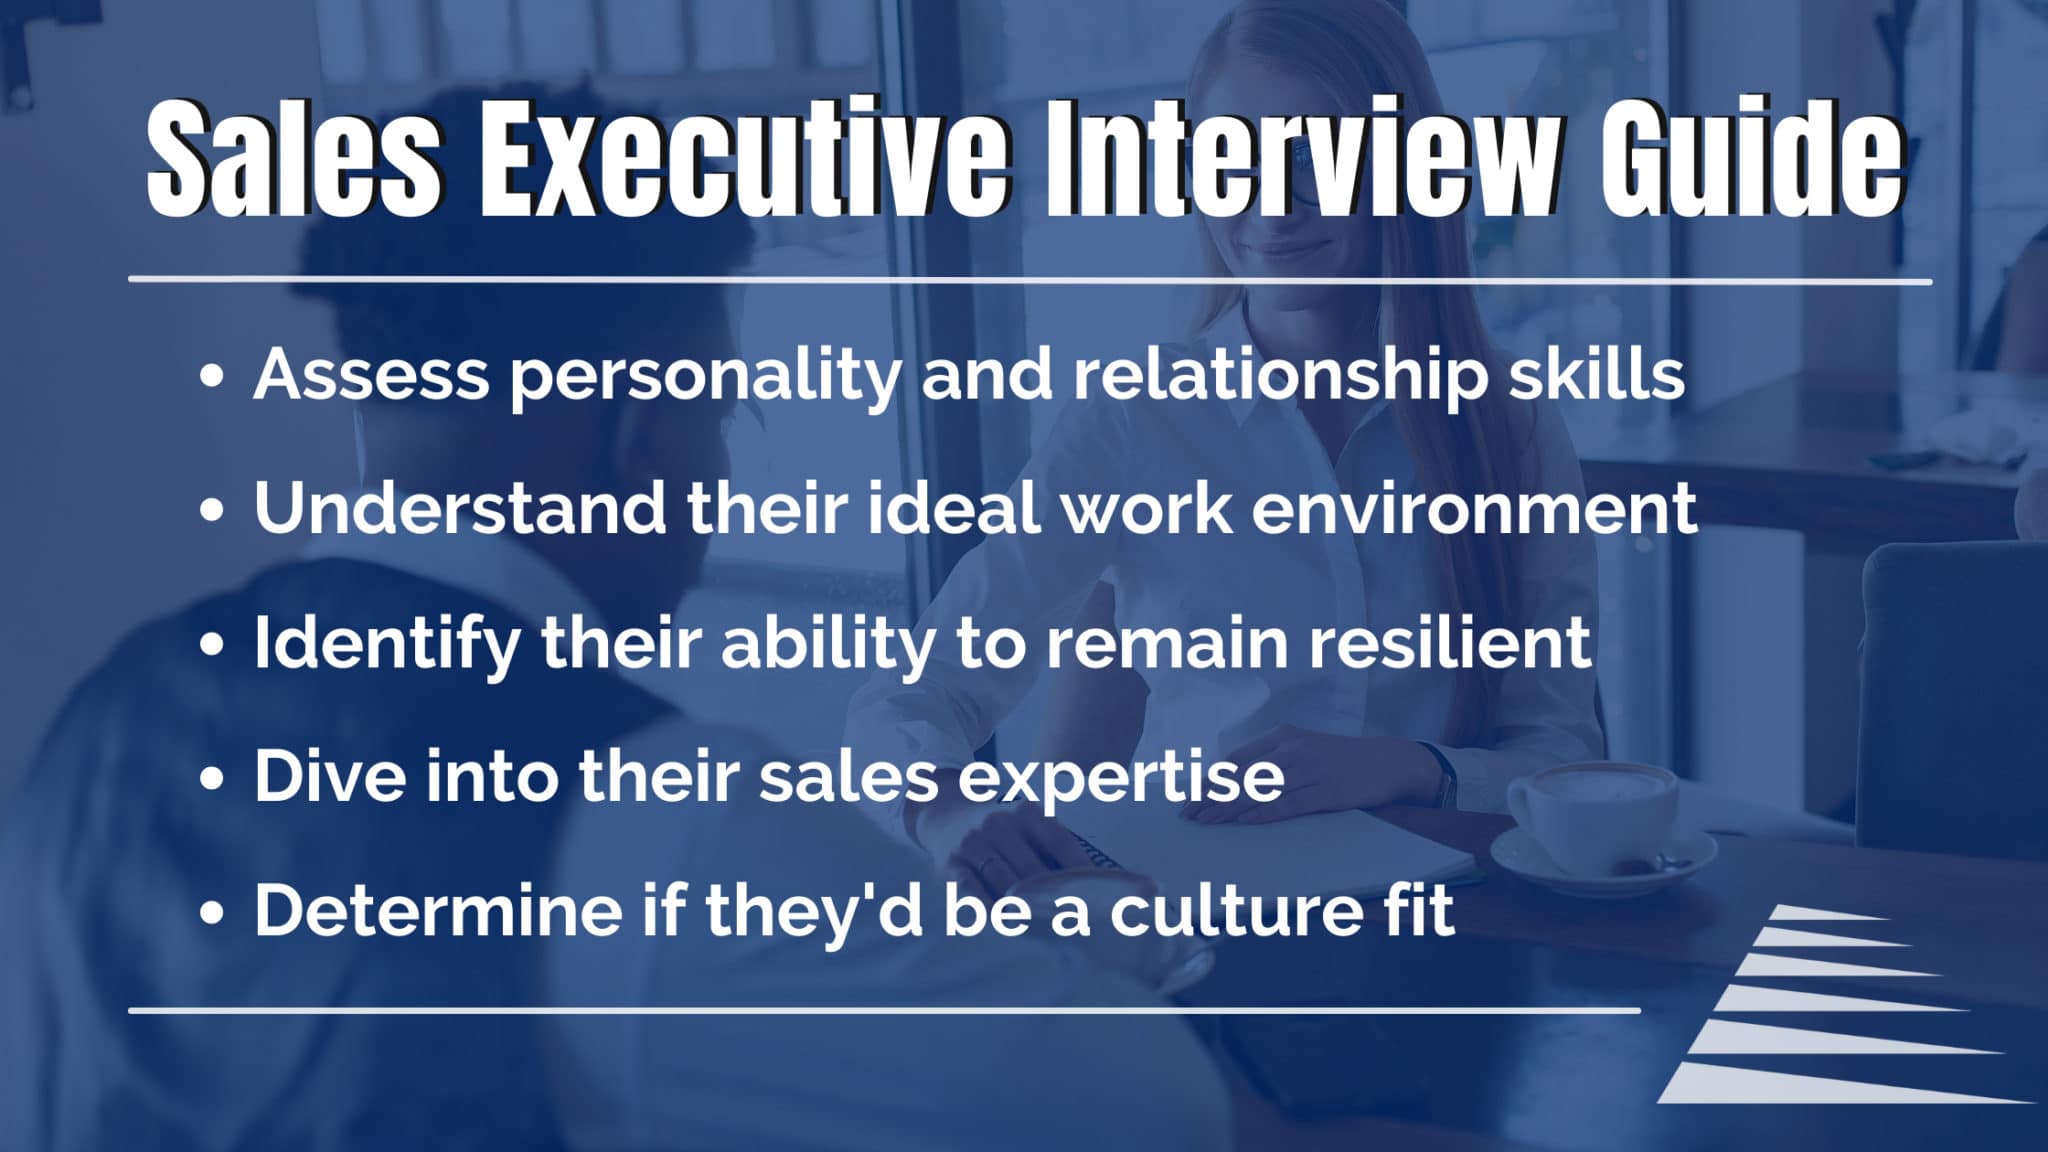 Sales Executive Interview Guide